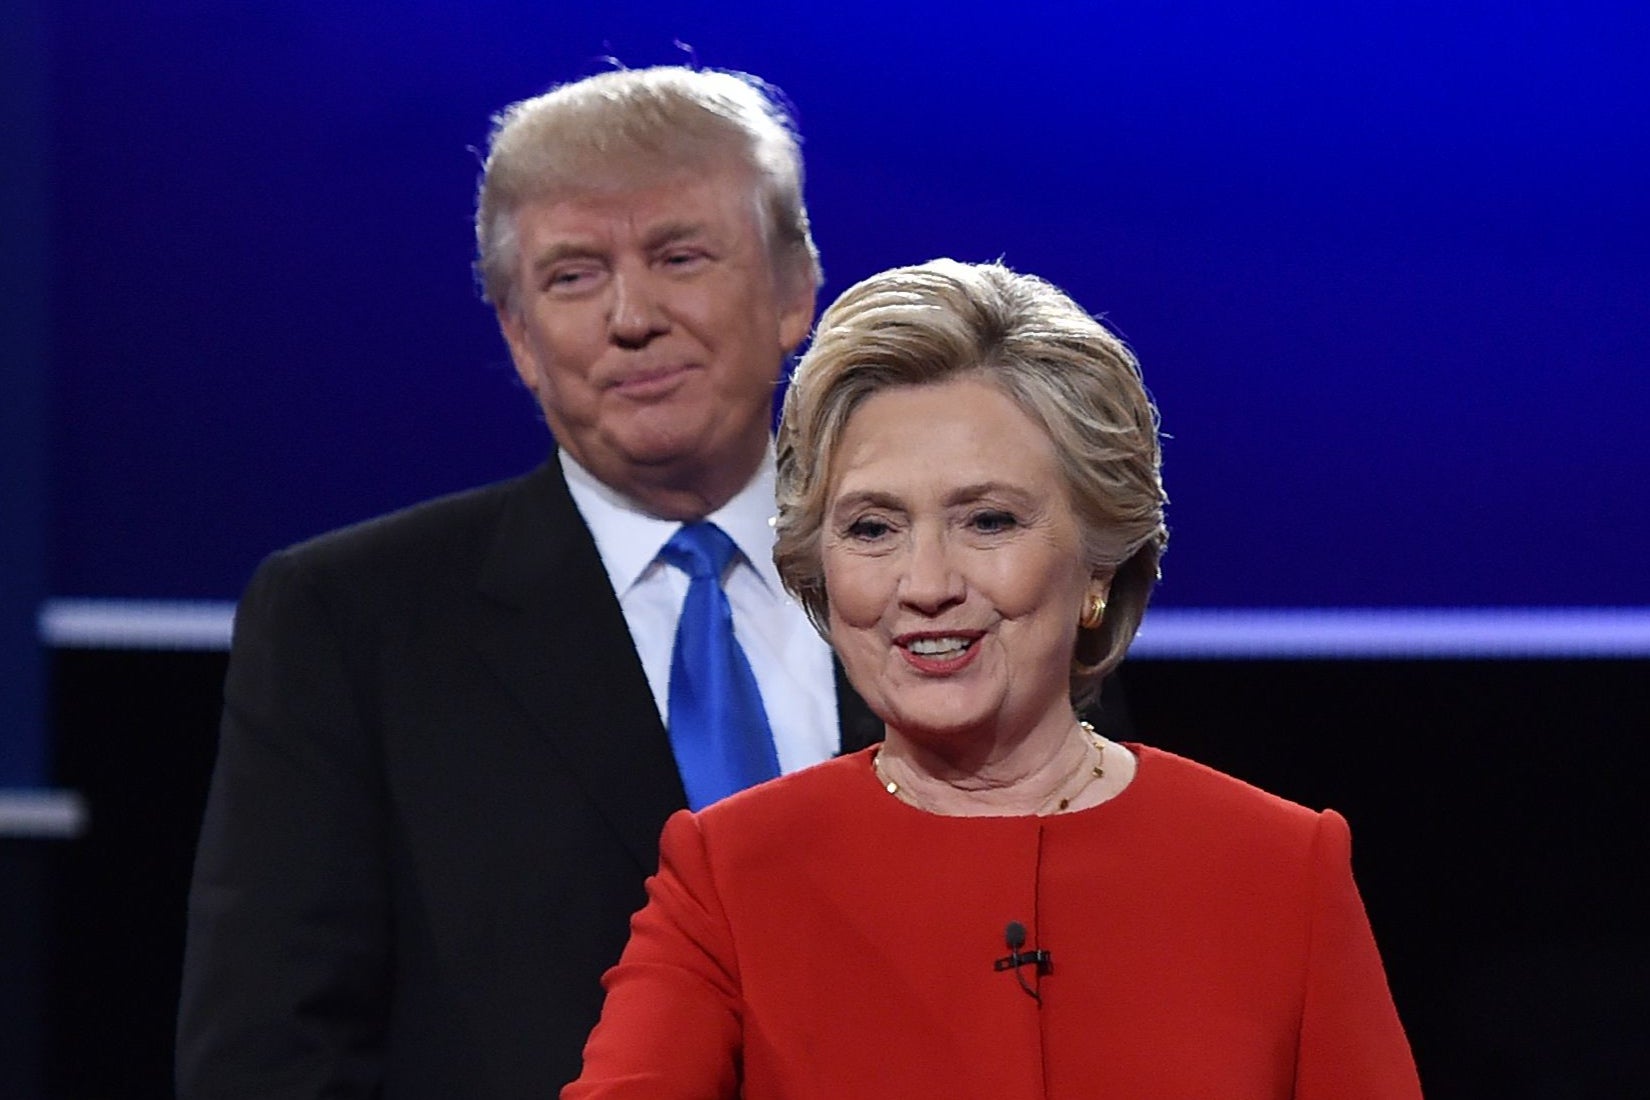 “It is a waste of time to try to refute Mr. Trump’s arguments like in a normal debate,” Clinton wrote in a new op-ed ahead of Thusday’s debate between Trump and Biden. She is pictured in a 2016 debate with Trump